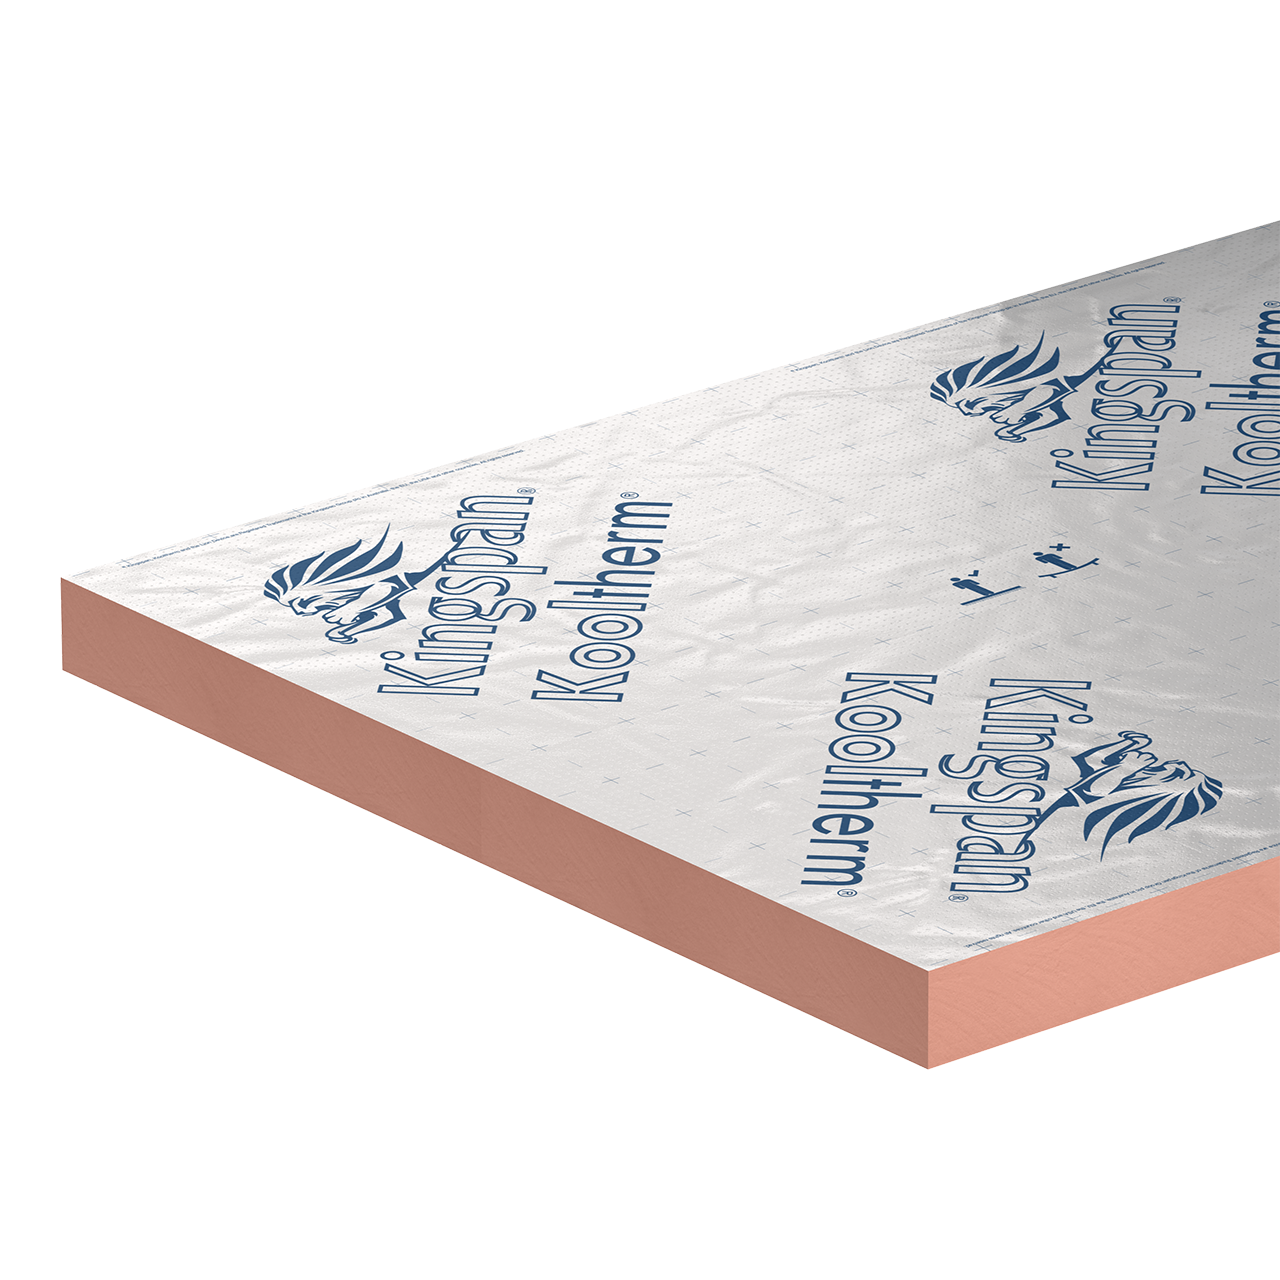 Kingspan Kooltherm K112 Framing Insulation Board 2400mm x 1200mm x 130mm (Pack of 2)